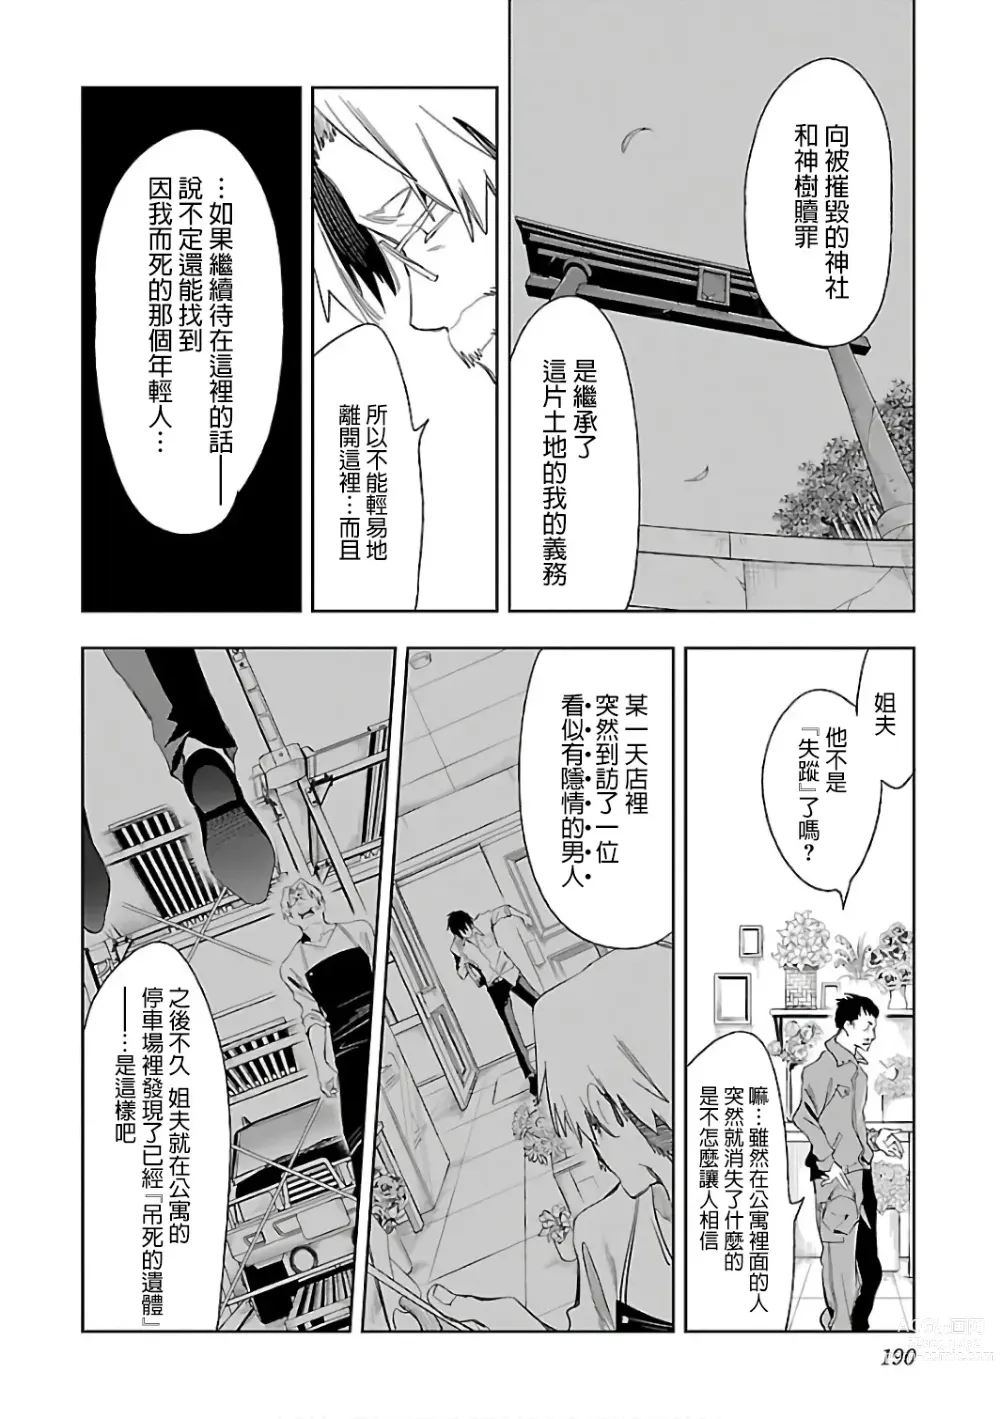 Page 1190 of doujinshi 神さまの怨結び 全1-6巻